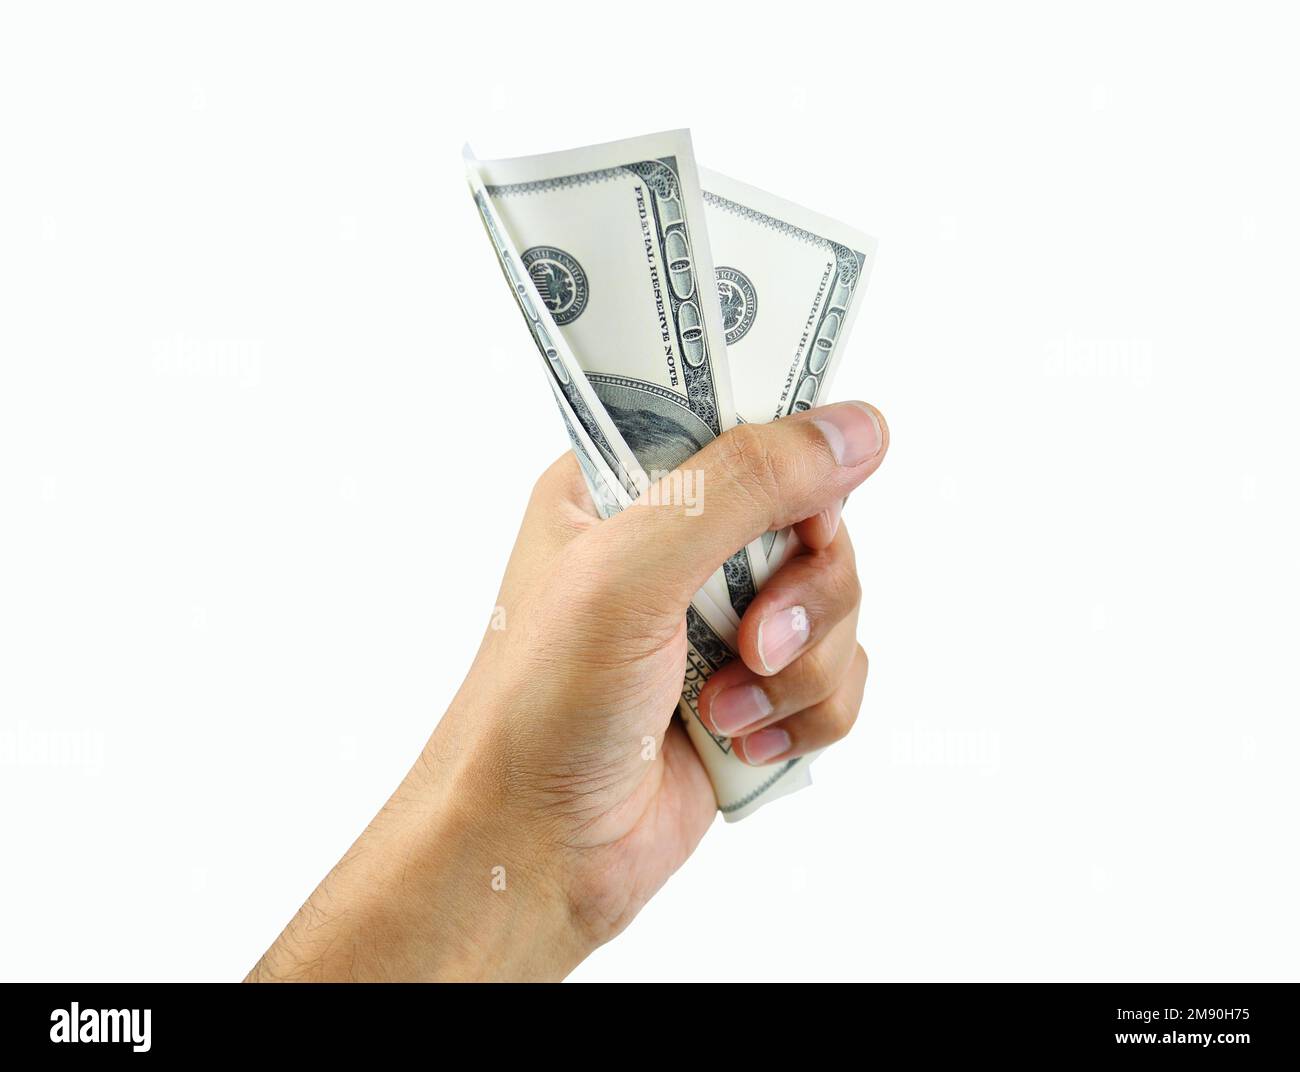 Close up of a man's hand crushing a wad of hundred dollar notes while isolated on a white background Stock Photo